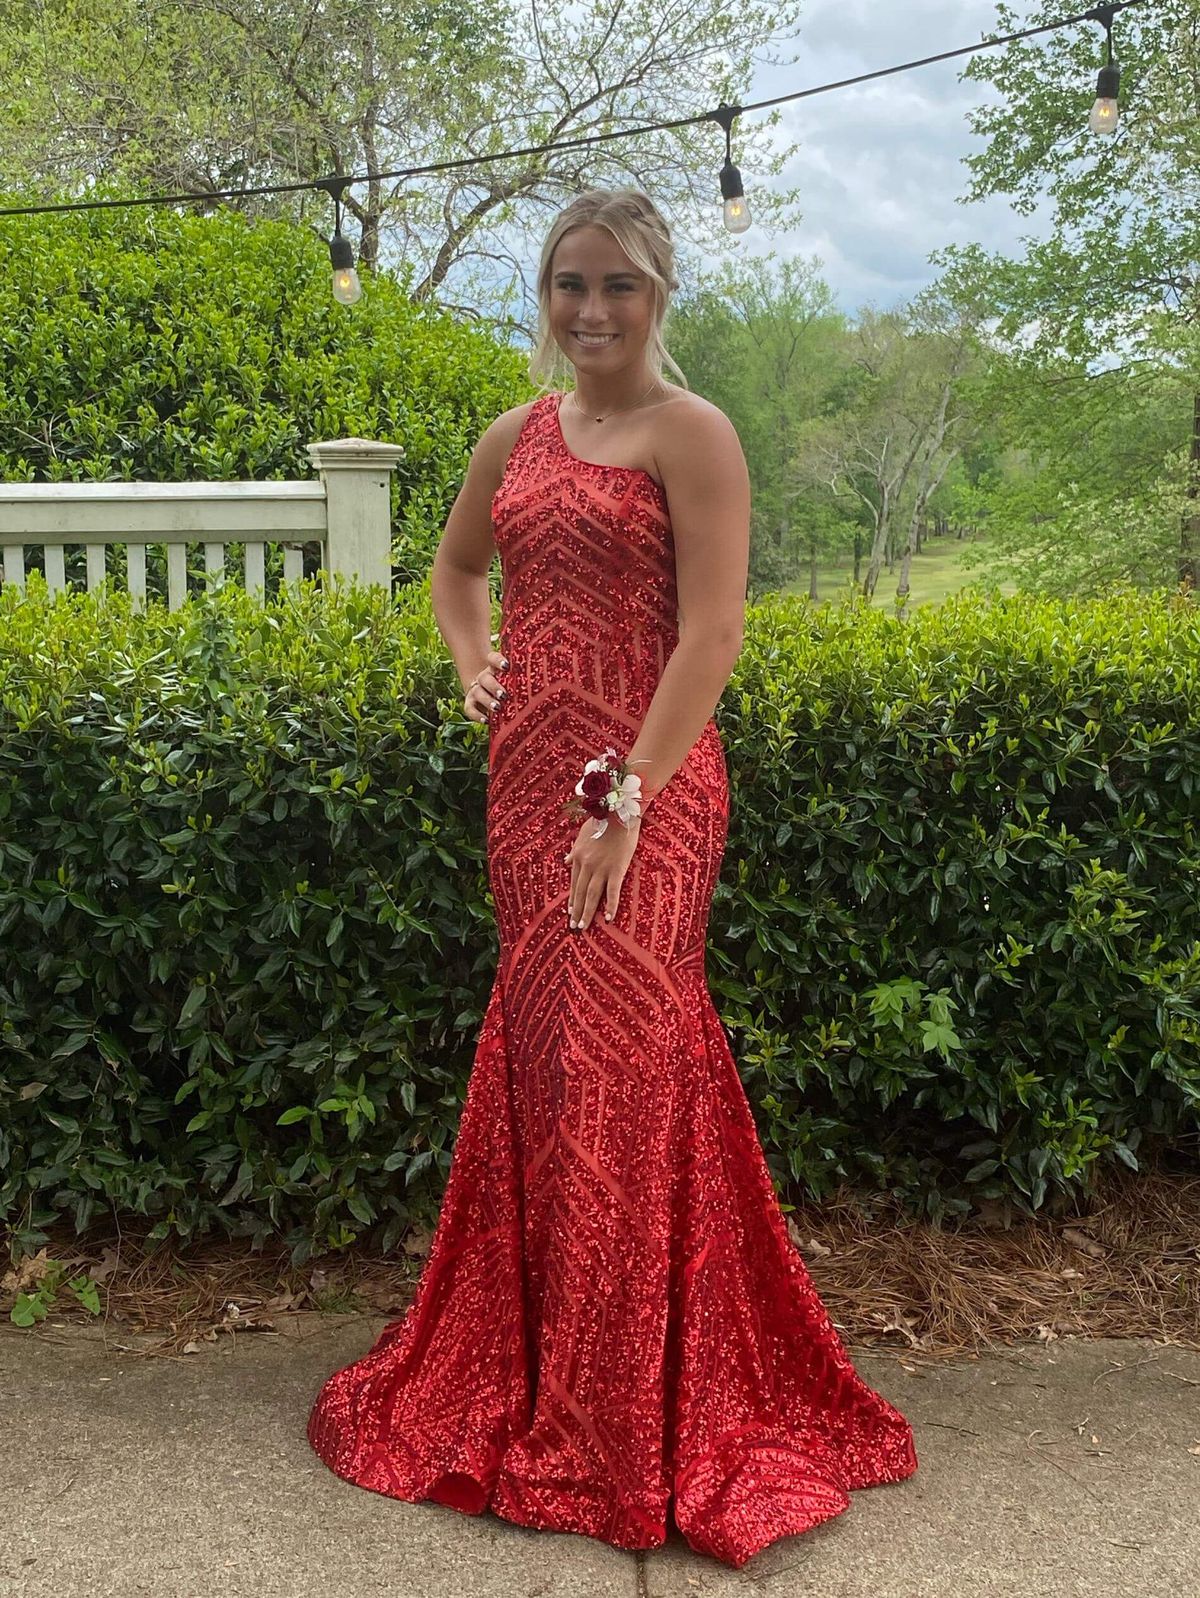 Jovani Size 4 Prom One Shoulder Red Mermaid Dress on Queenly